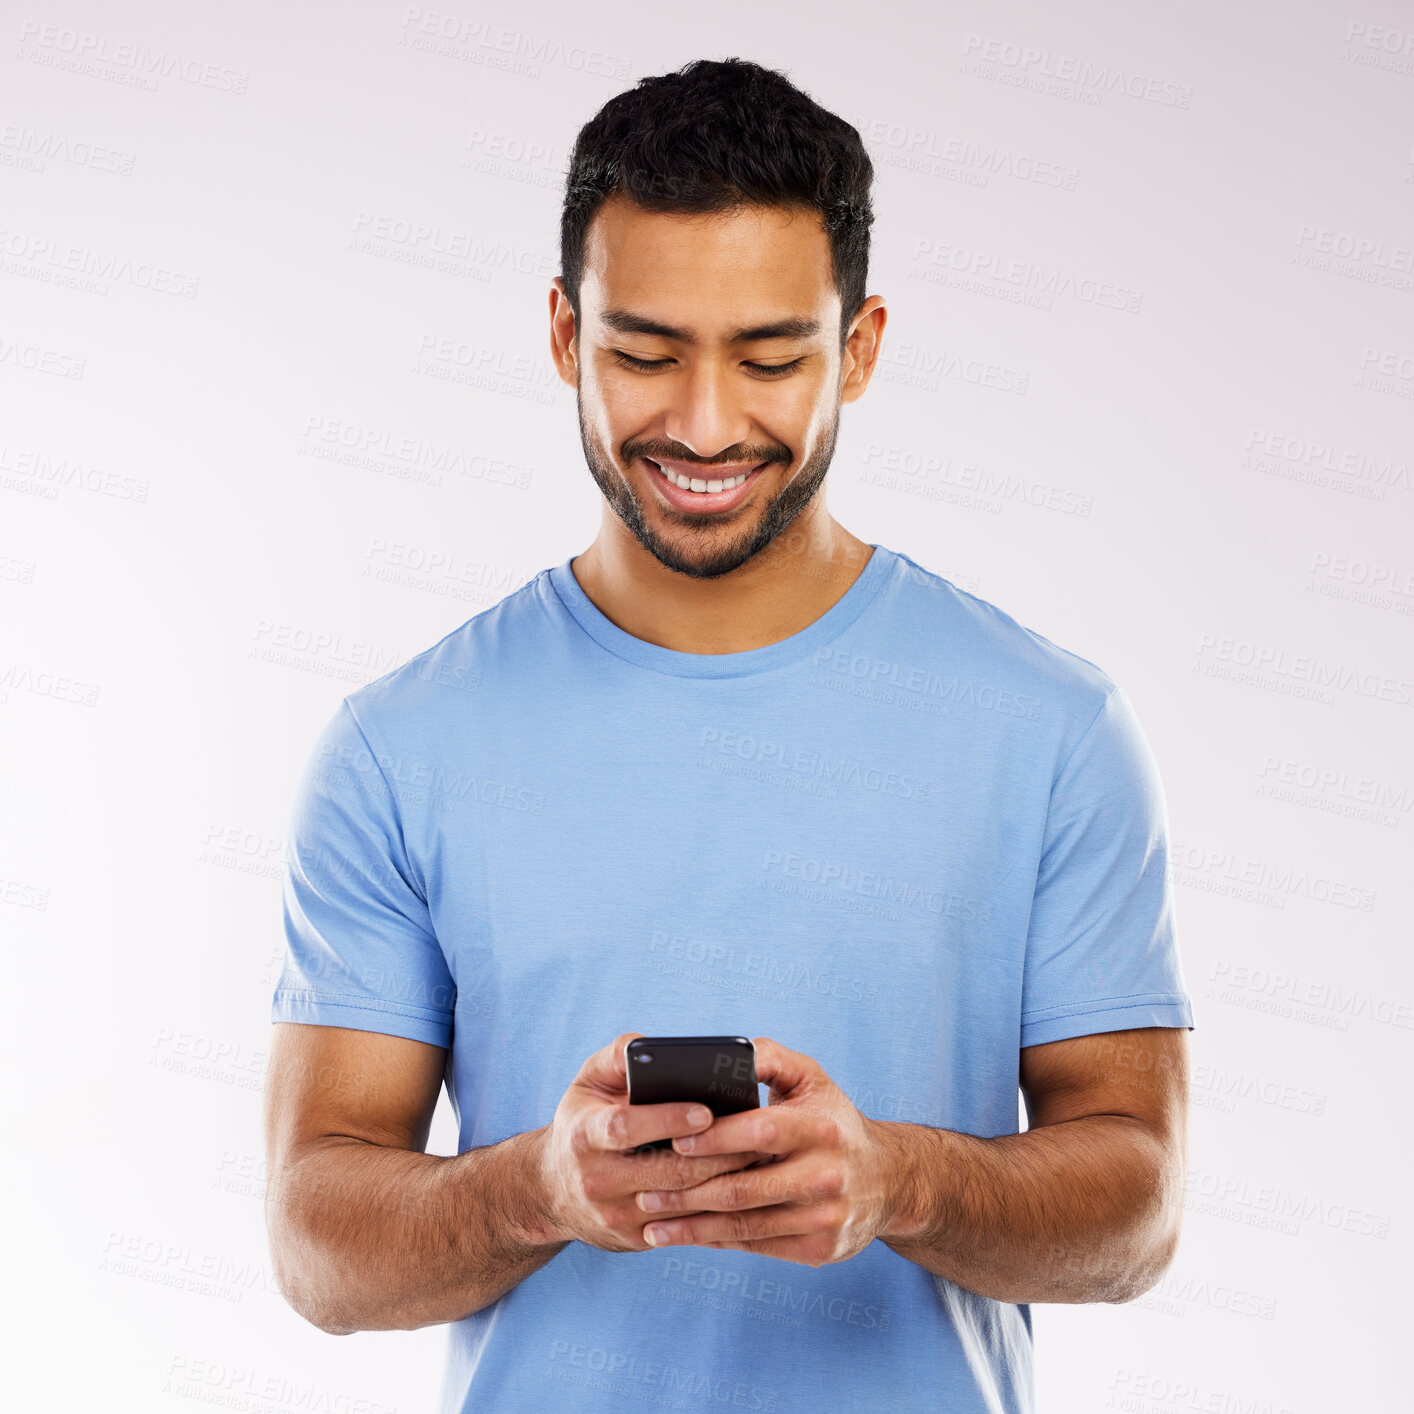 Buy stock photo Studio shot of a young man using a phone against a grey background